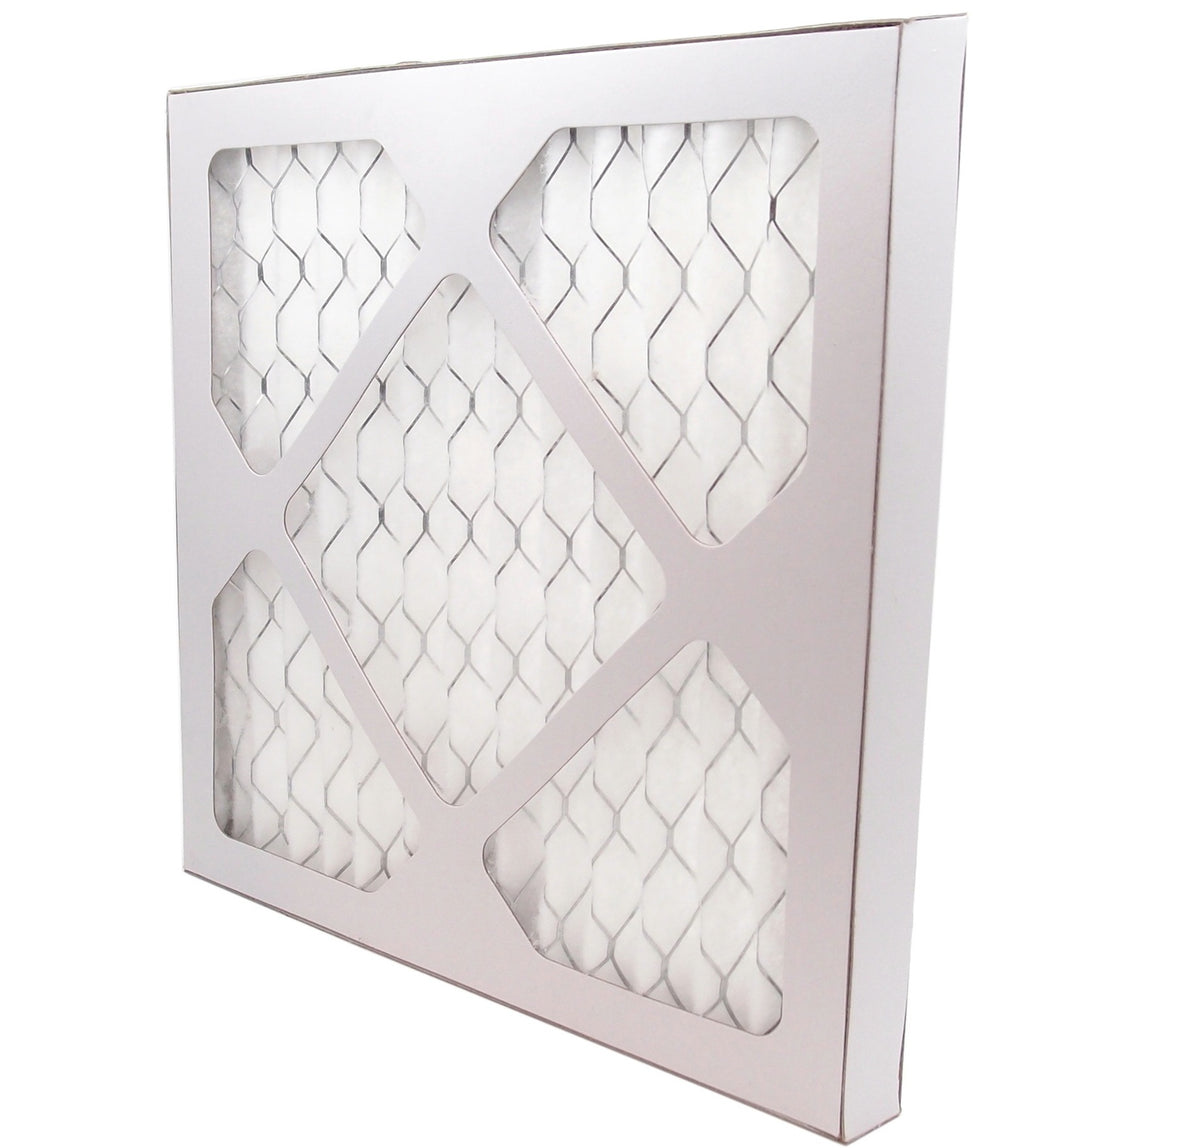 14&quot; x 10&quot; Pleated MERV 8 Filter for HVAC Return Filter Grille